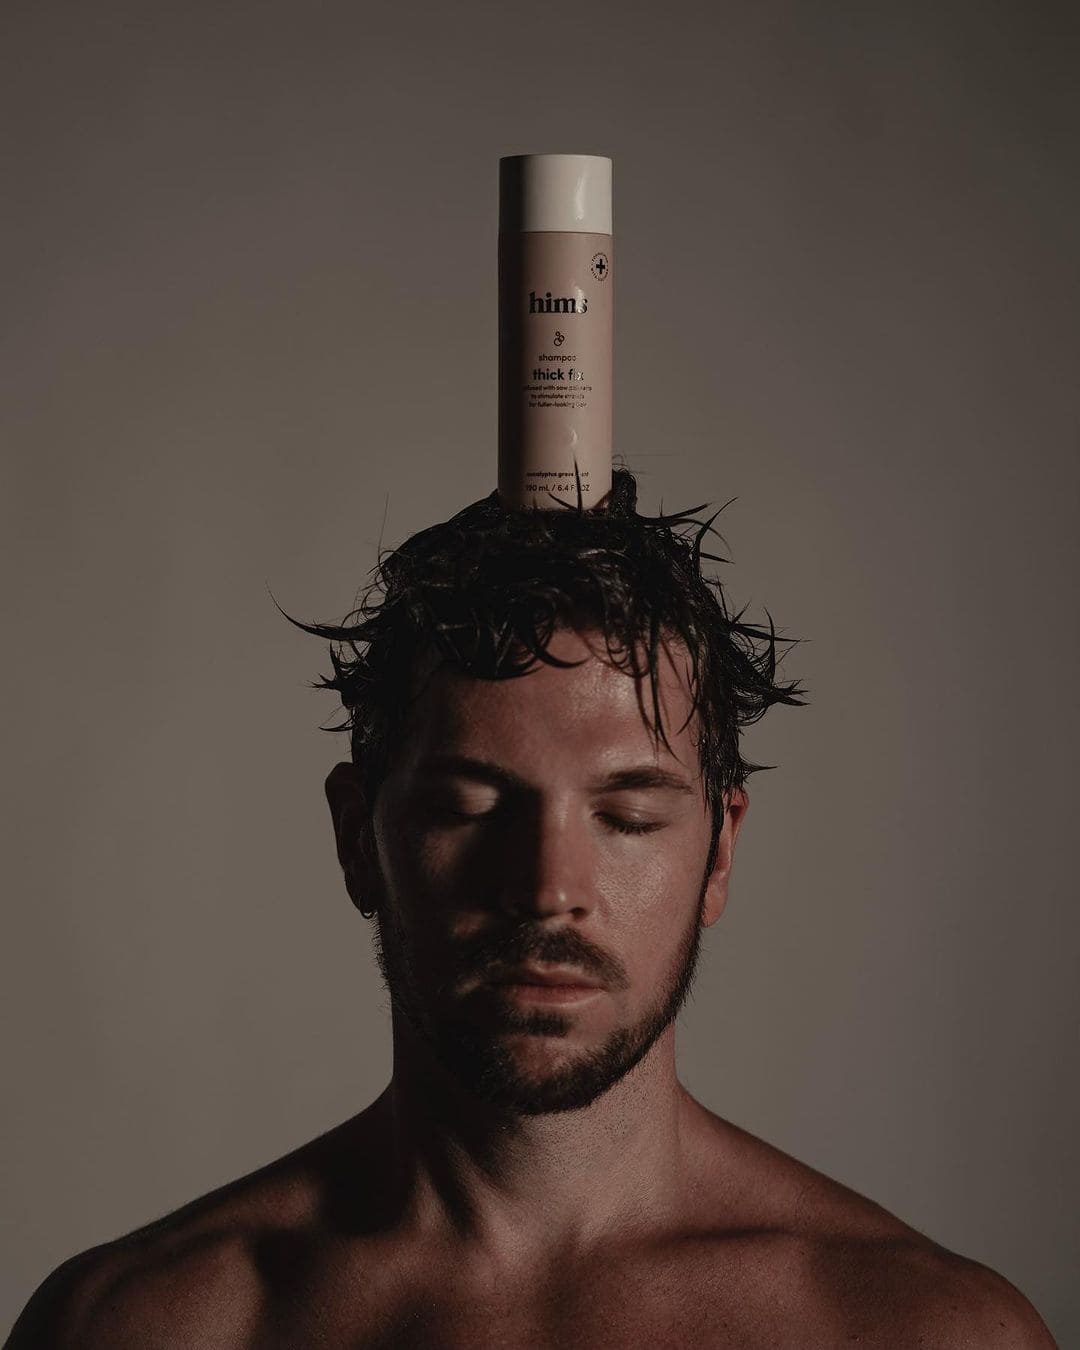 a bottle of thick fix shampoo by hims on top of a mans head